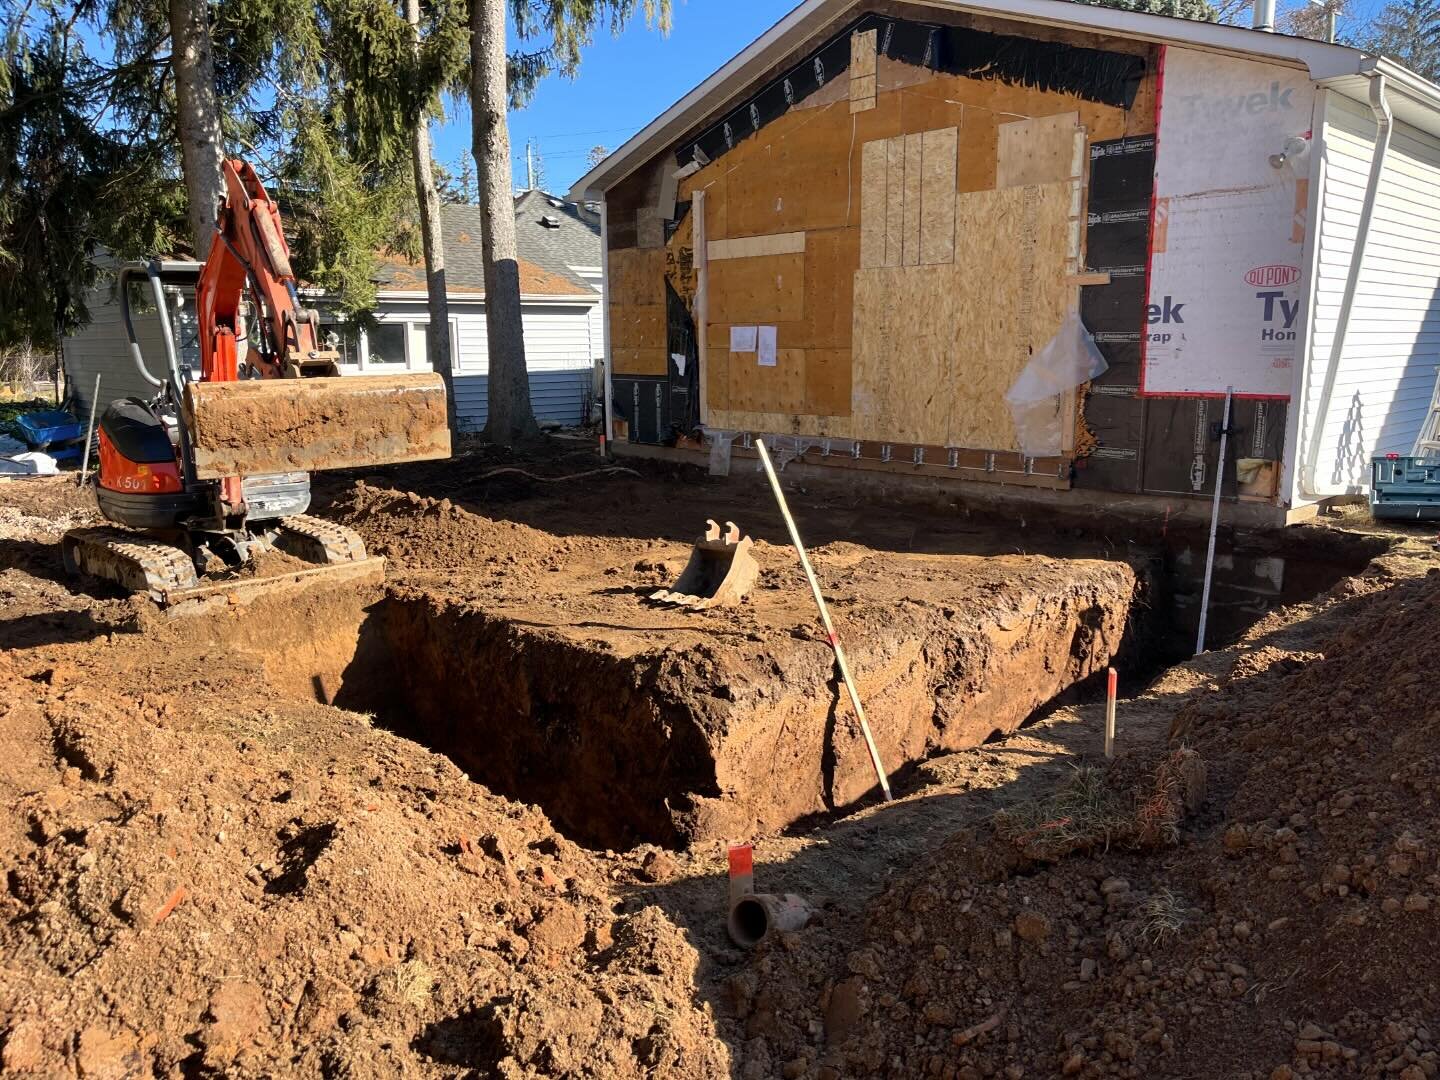 Nothing to see here! Just another addition with ADU ( Additional Dwelling Unit )

#strategyconst #hamontcontractor #houserenovation #houserenovations #framing  #housereno #restoration
#bathroomrenovation #burlingtoncontractor #remodel 
#hamiltoncontr